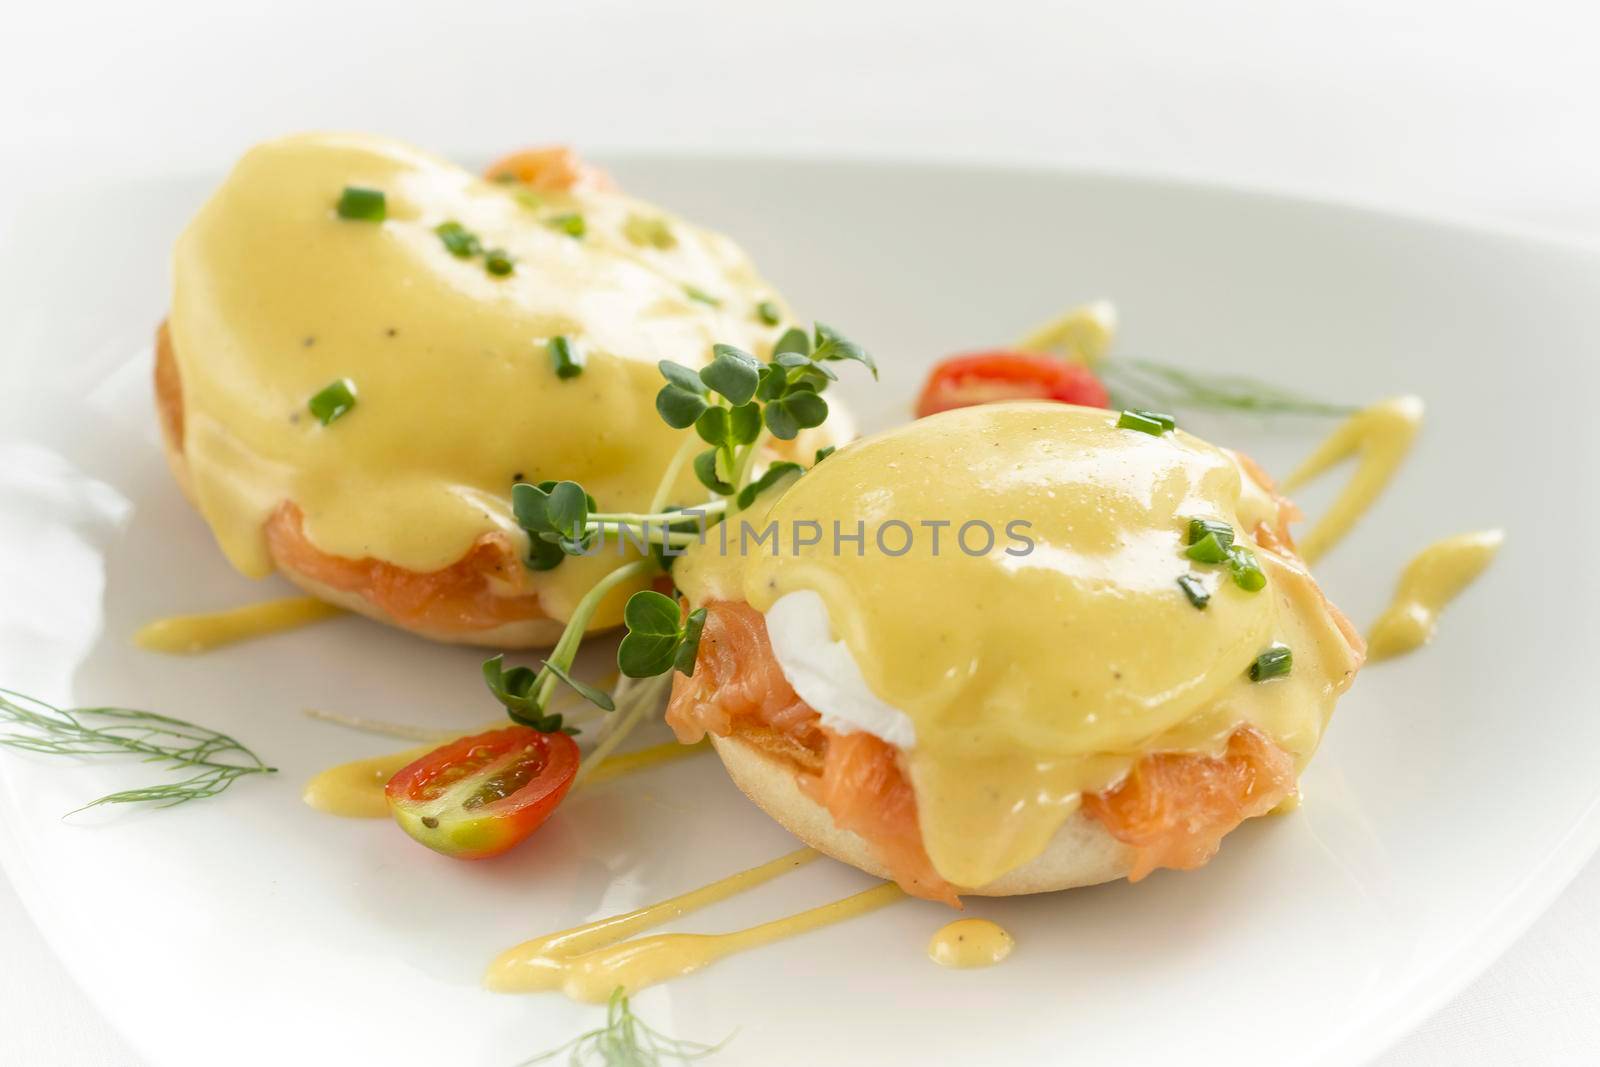 eggs benedict royale breakfast with smoked salmon and hollandaise sauce by jackmalipan